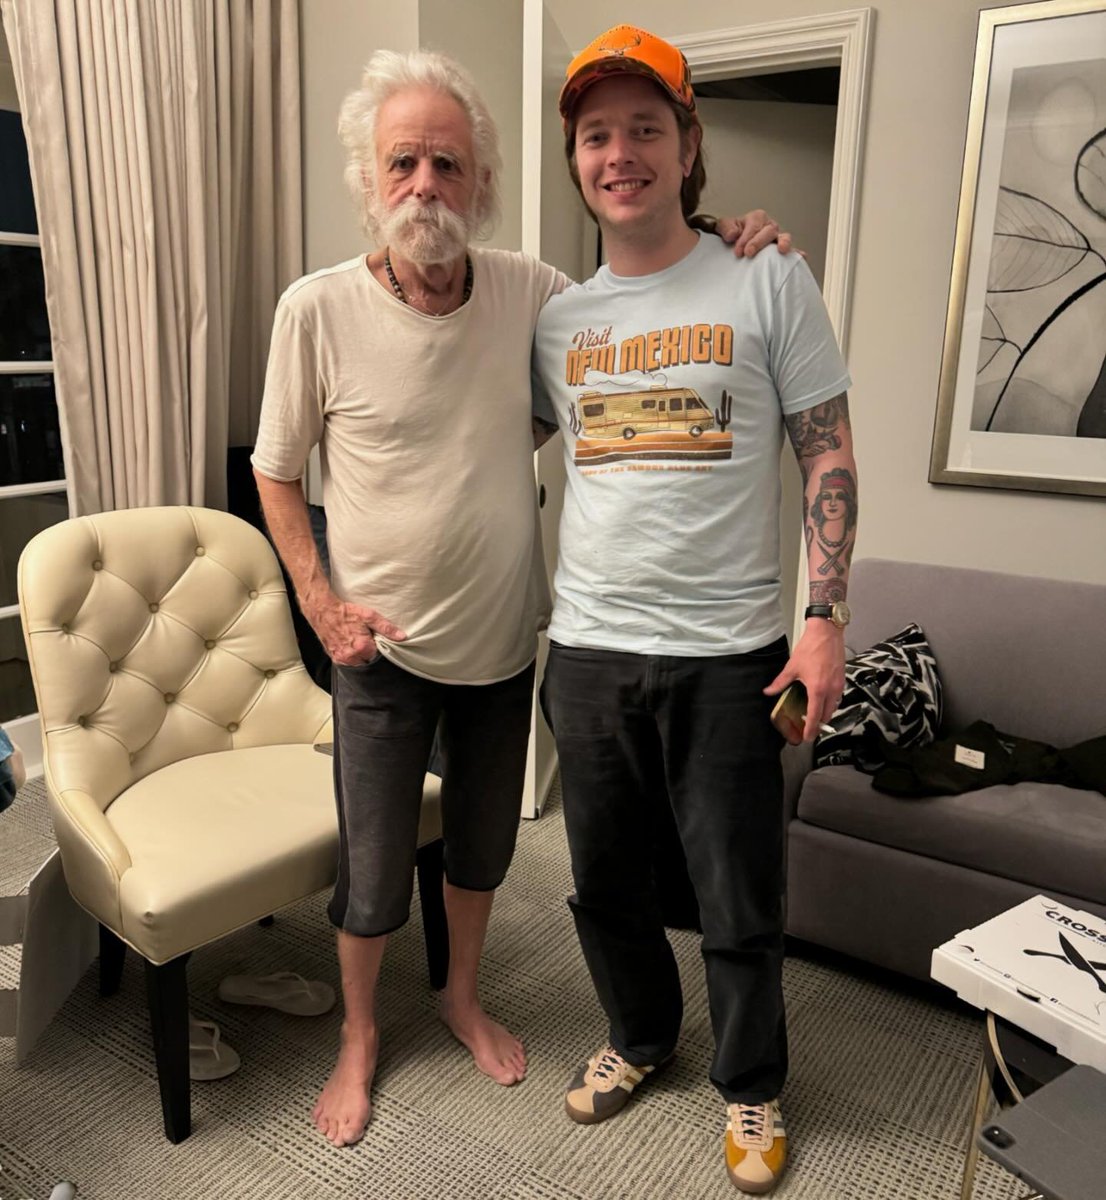 Good to visit with you last night @BobWeir!! I don’t know what the roofs like out there at the sphere but I’m sure you’ll figure out a way to tear it off ❤️